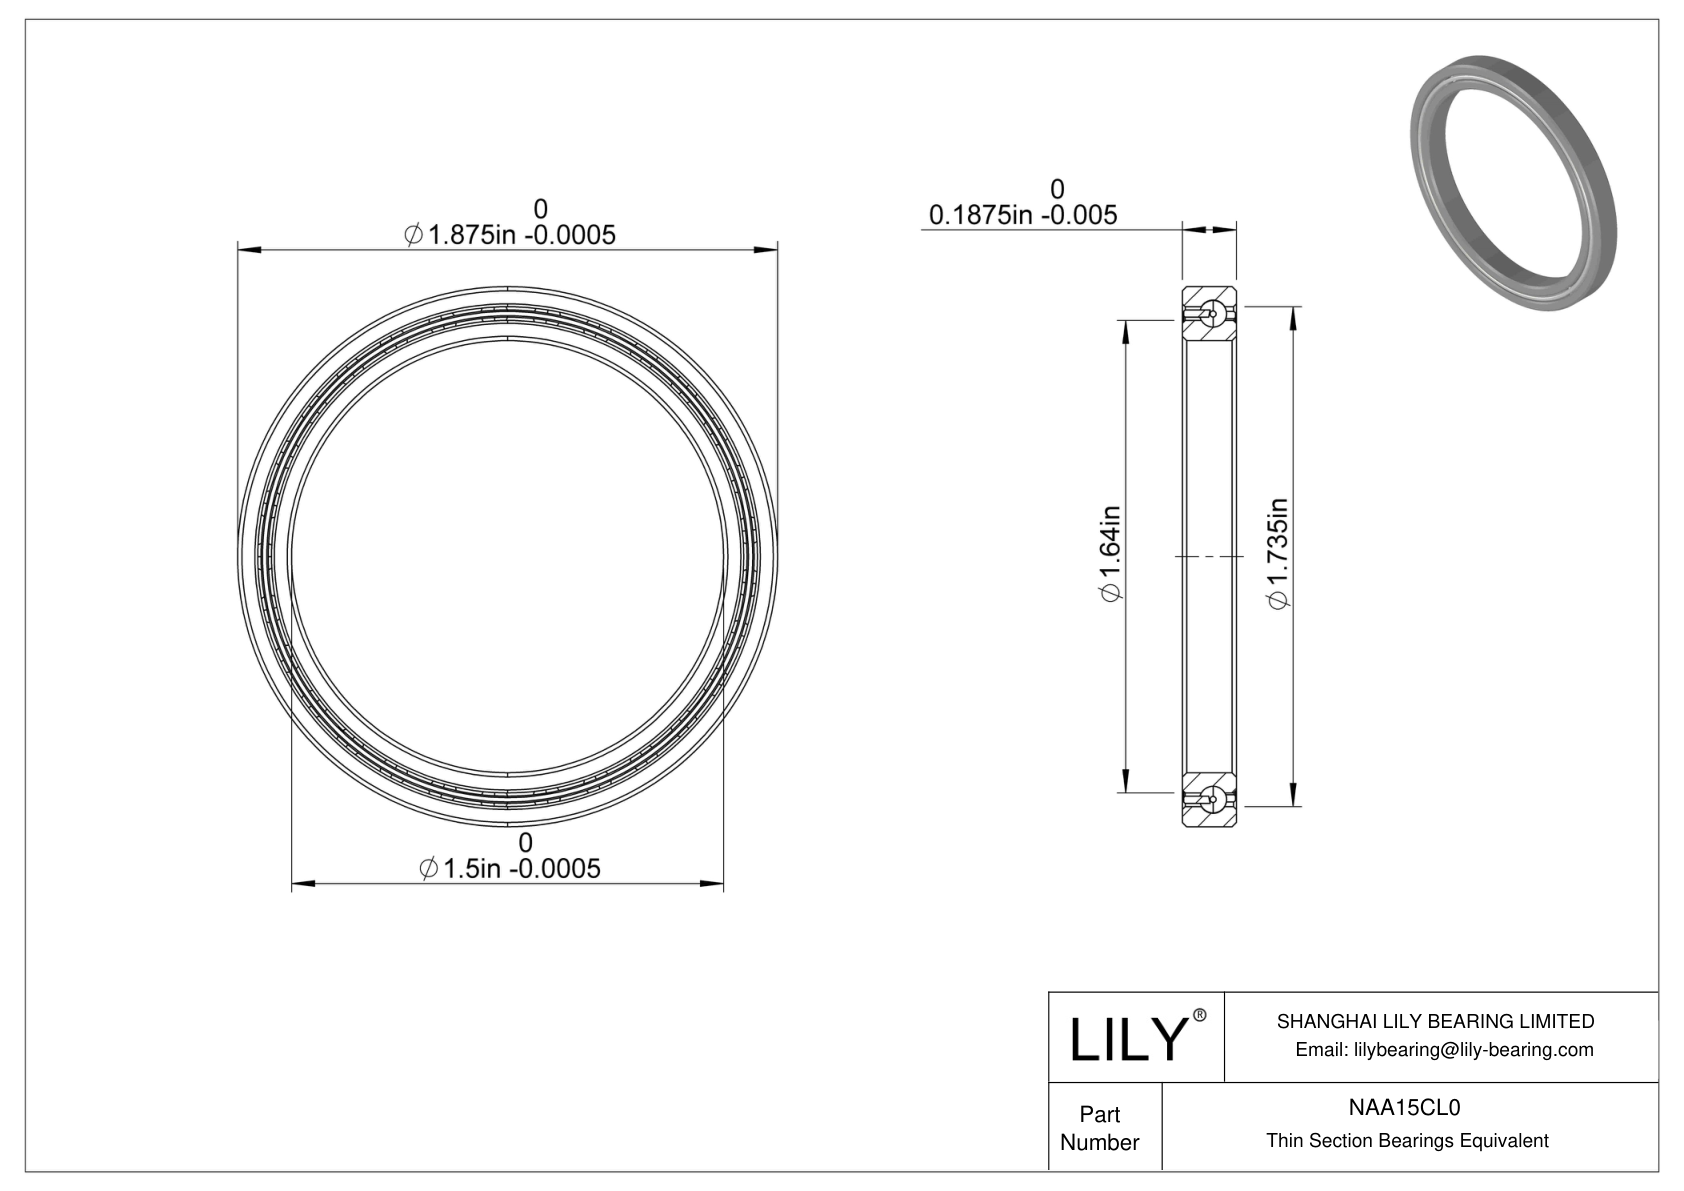 NAA15CL0 Constant Section (CS) Bearings CAD图形